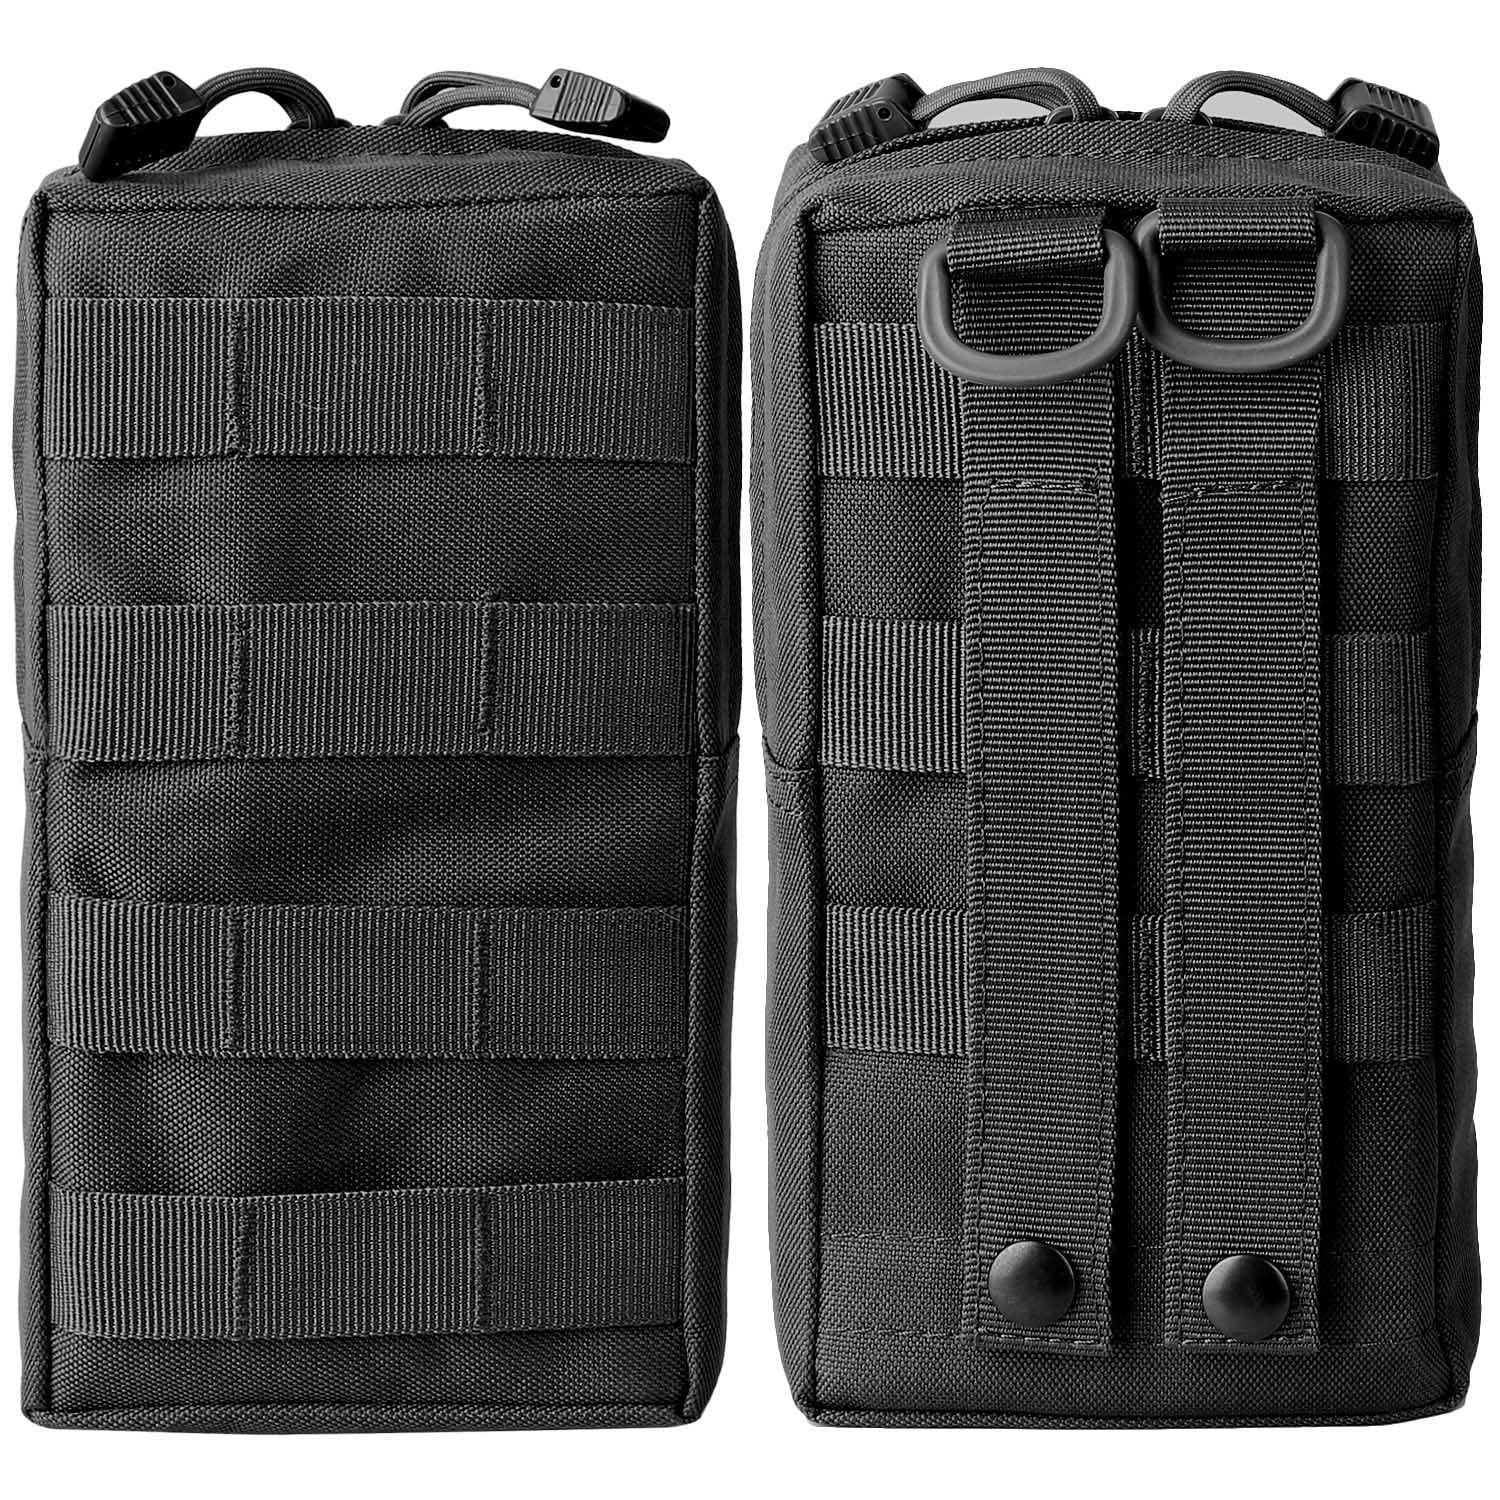 Tactical Compact Water-Resistant Utility Gadget Gear EDC Pouch Hanging Waist Bags Ydmpro 2 Pack Molle Pouches 